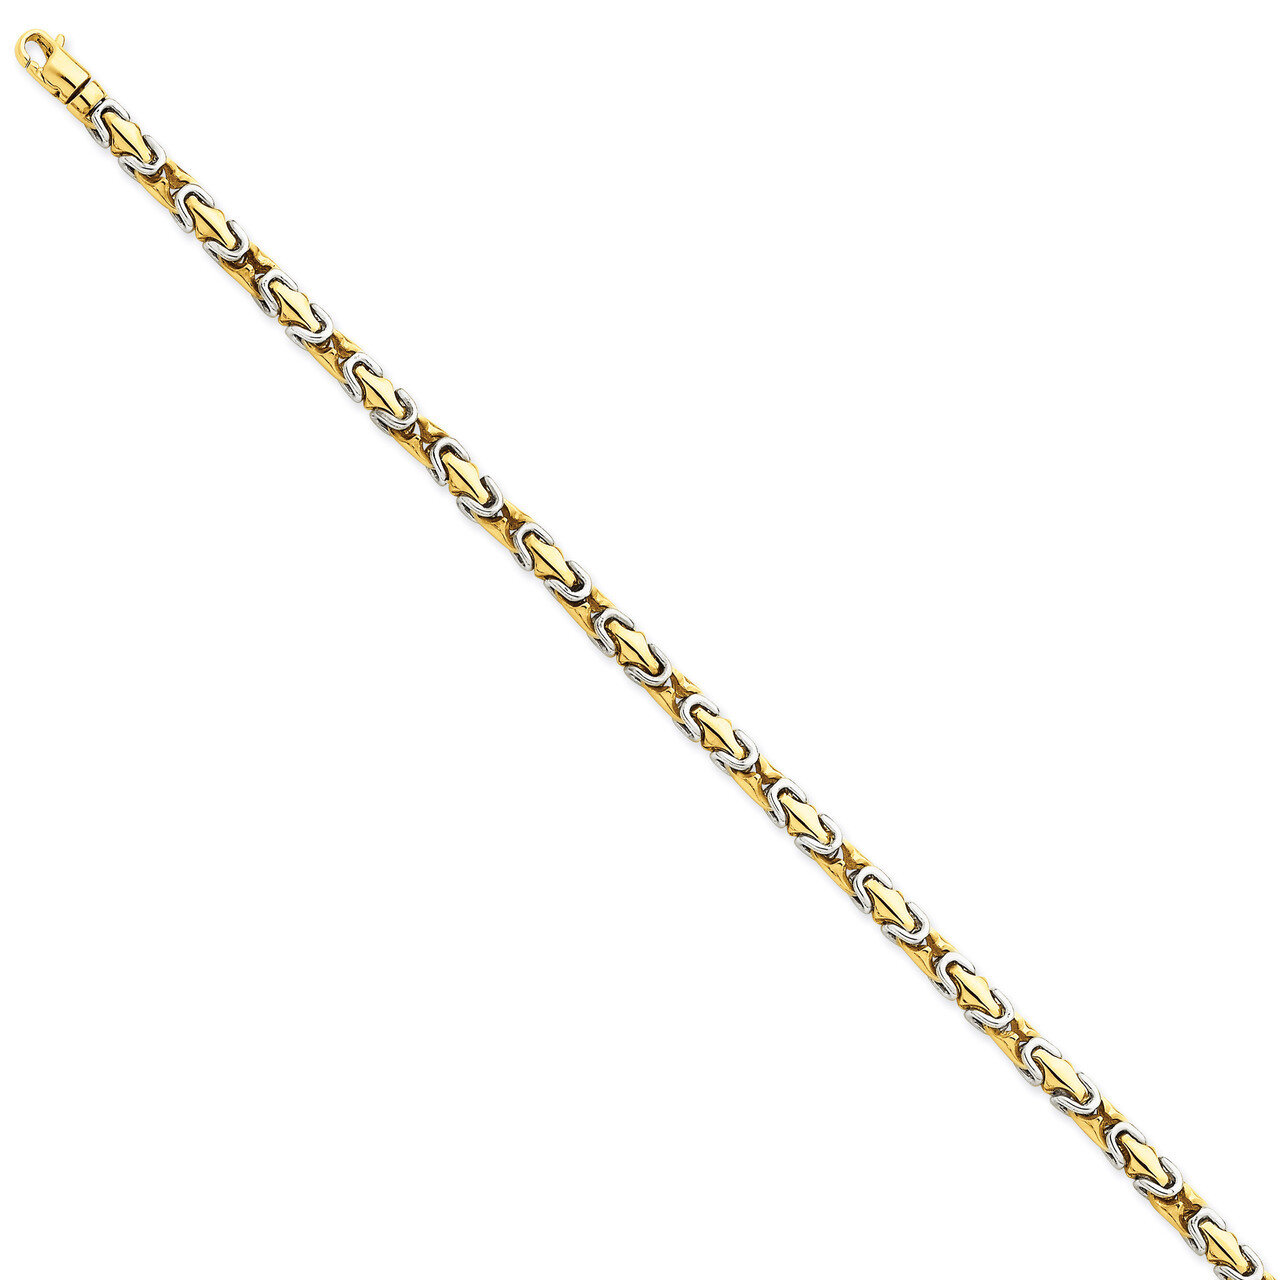 4.1mm Polished Fancy Link Chain 7 Inch 14k Two-Tone Gold LK571-7